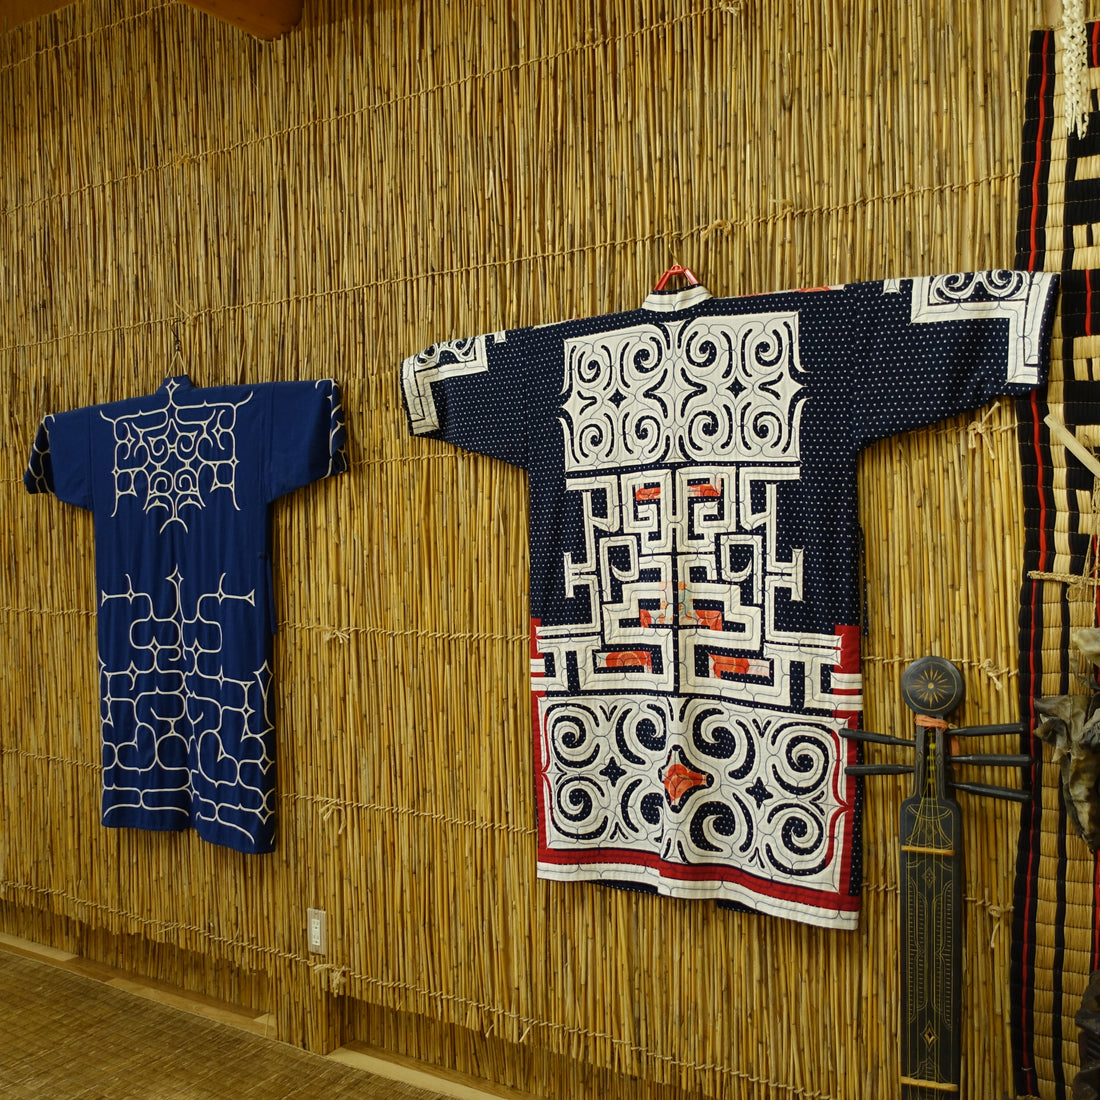 Why not rent costumes of the indigenous Ainu people?